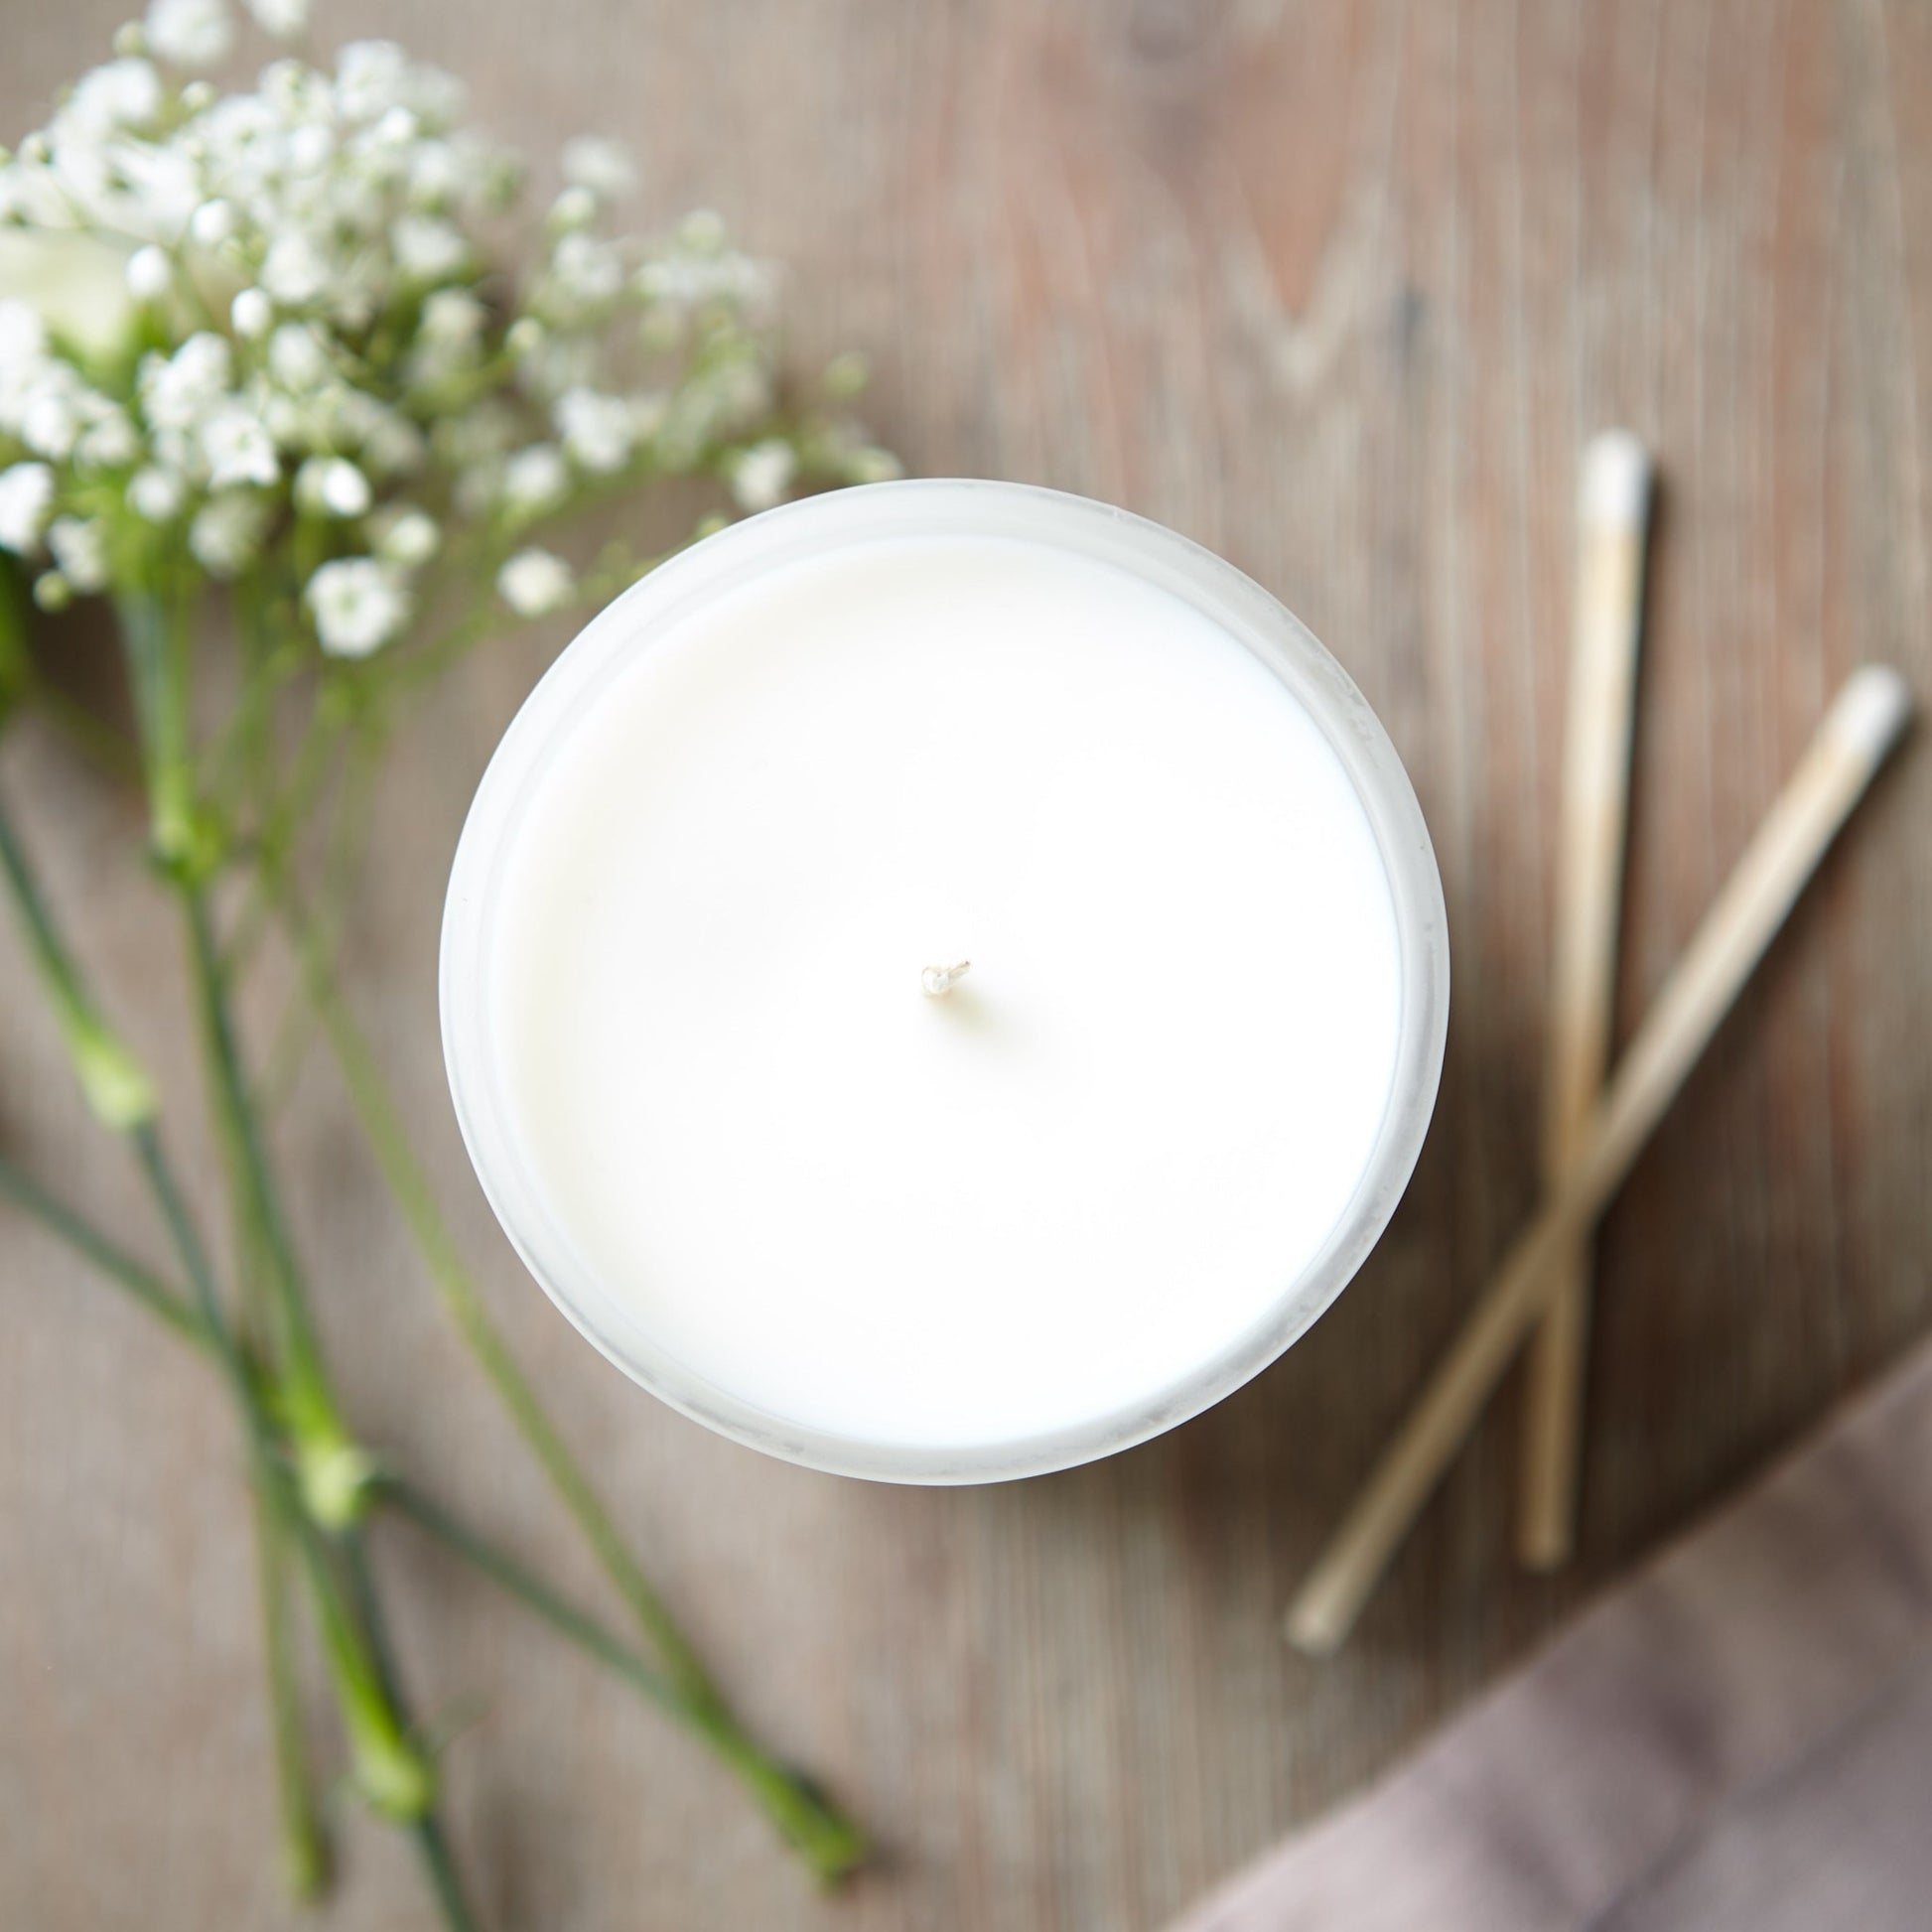 Be My Bridesmaid Initial Candle - Kindred Fires